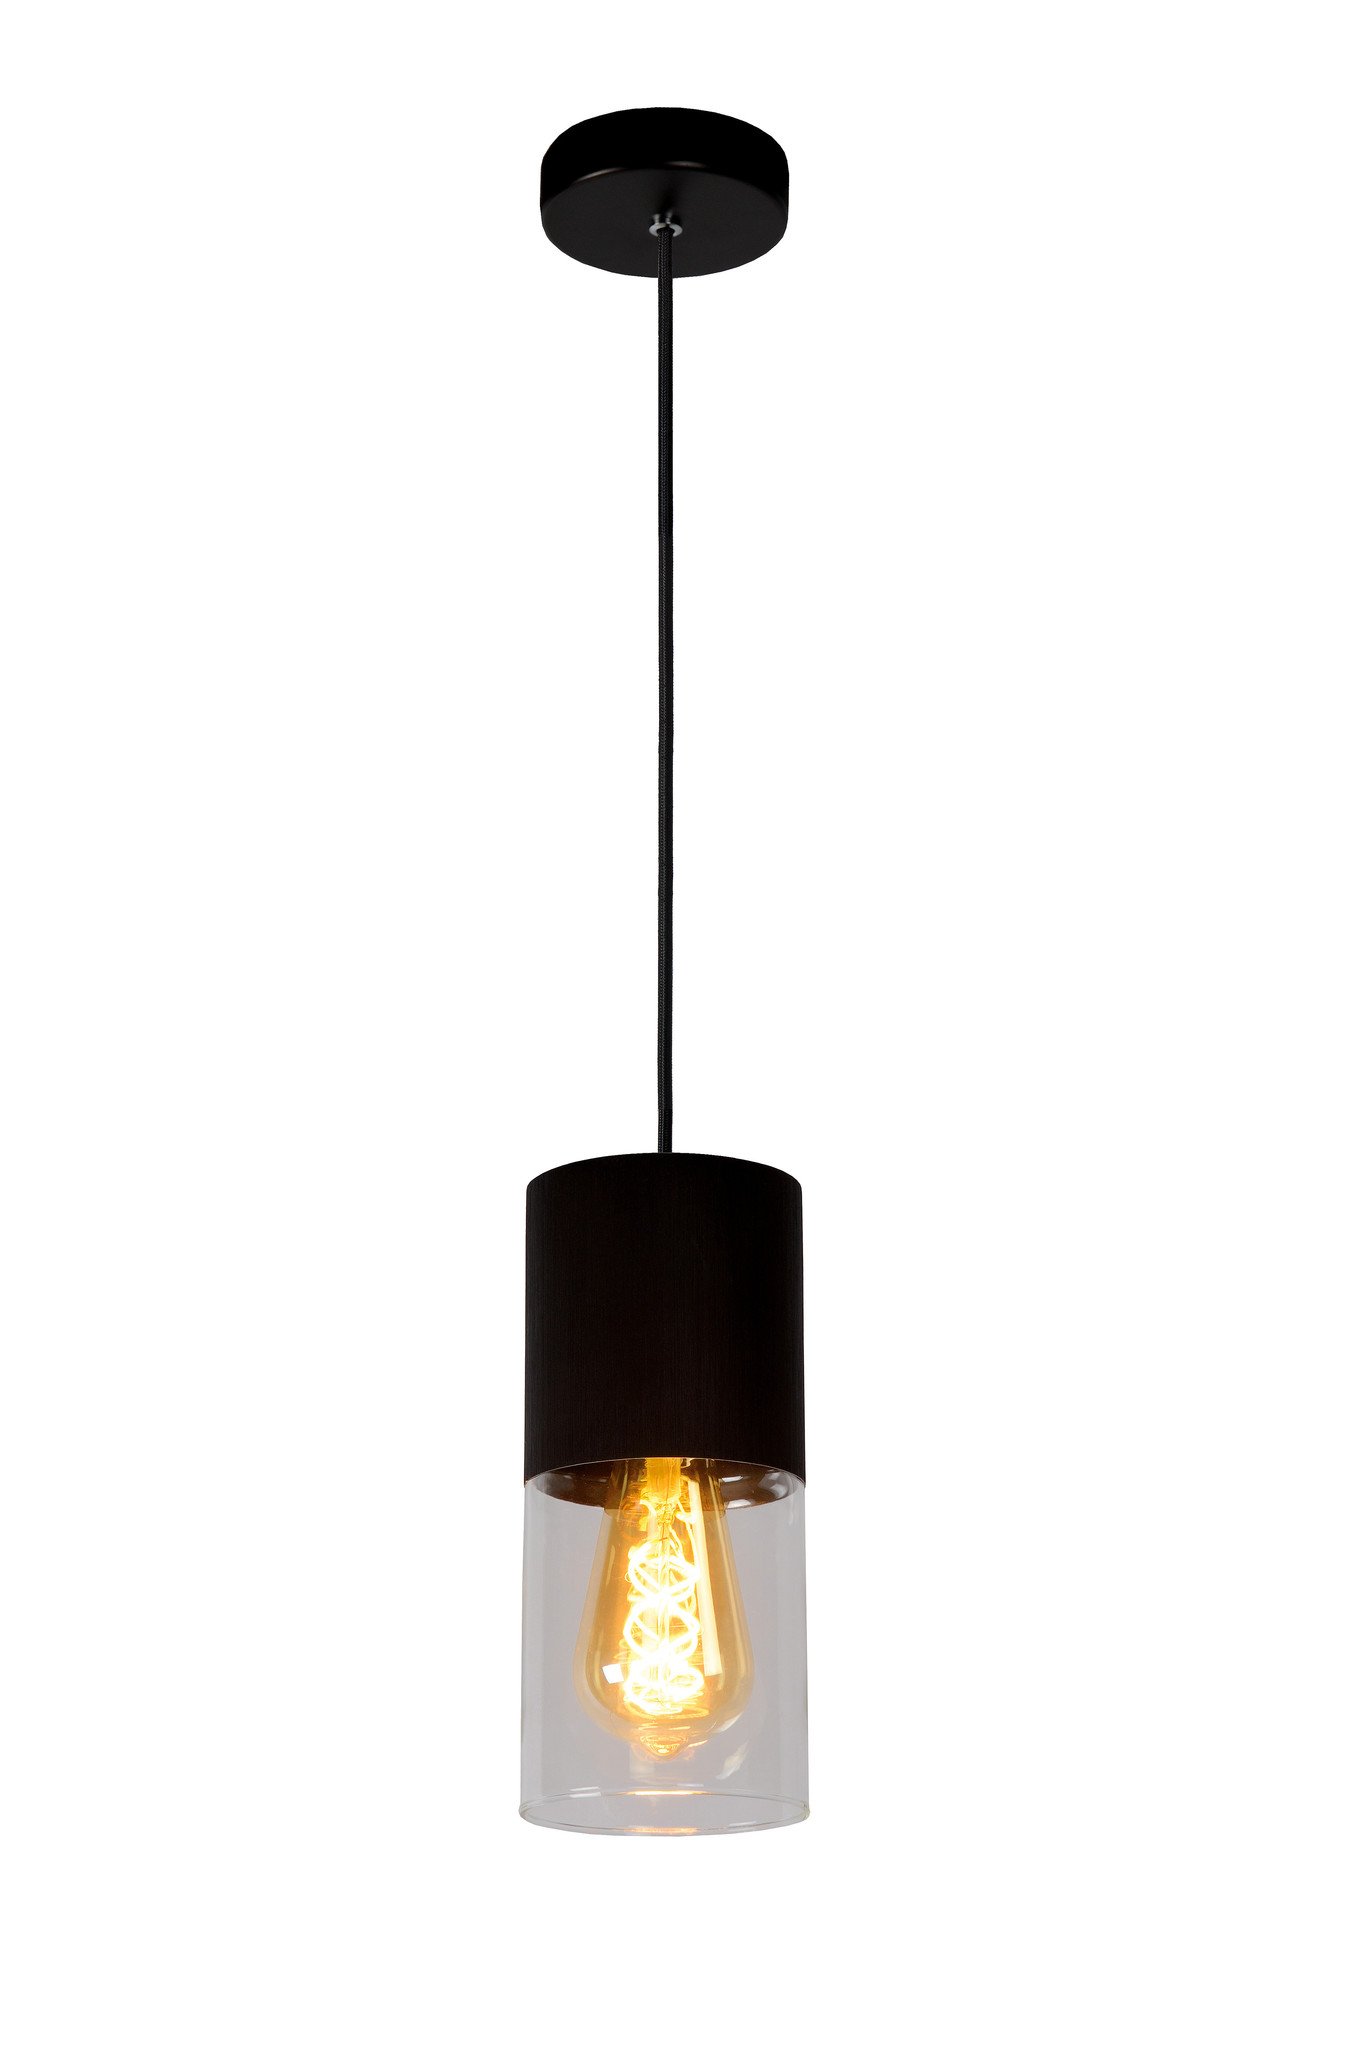 Lucide ZINO Hanglamp-Roest .-Ø10-1xE27-60W-Glas